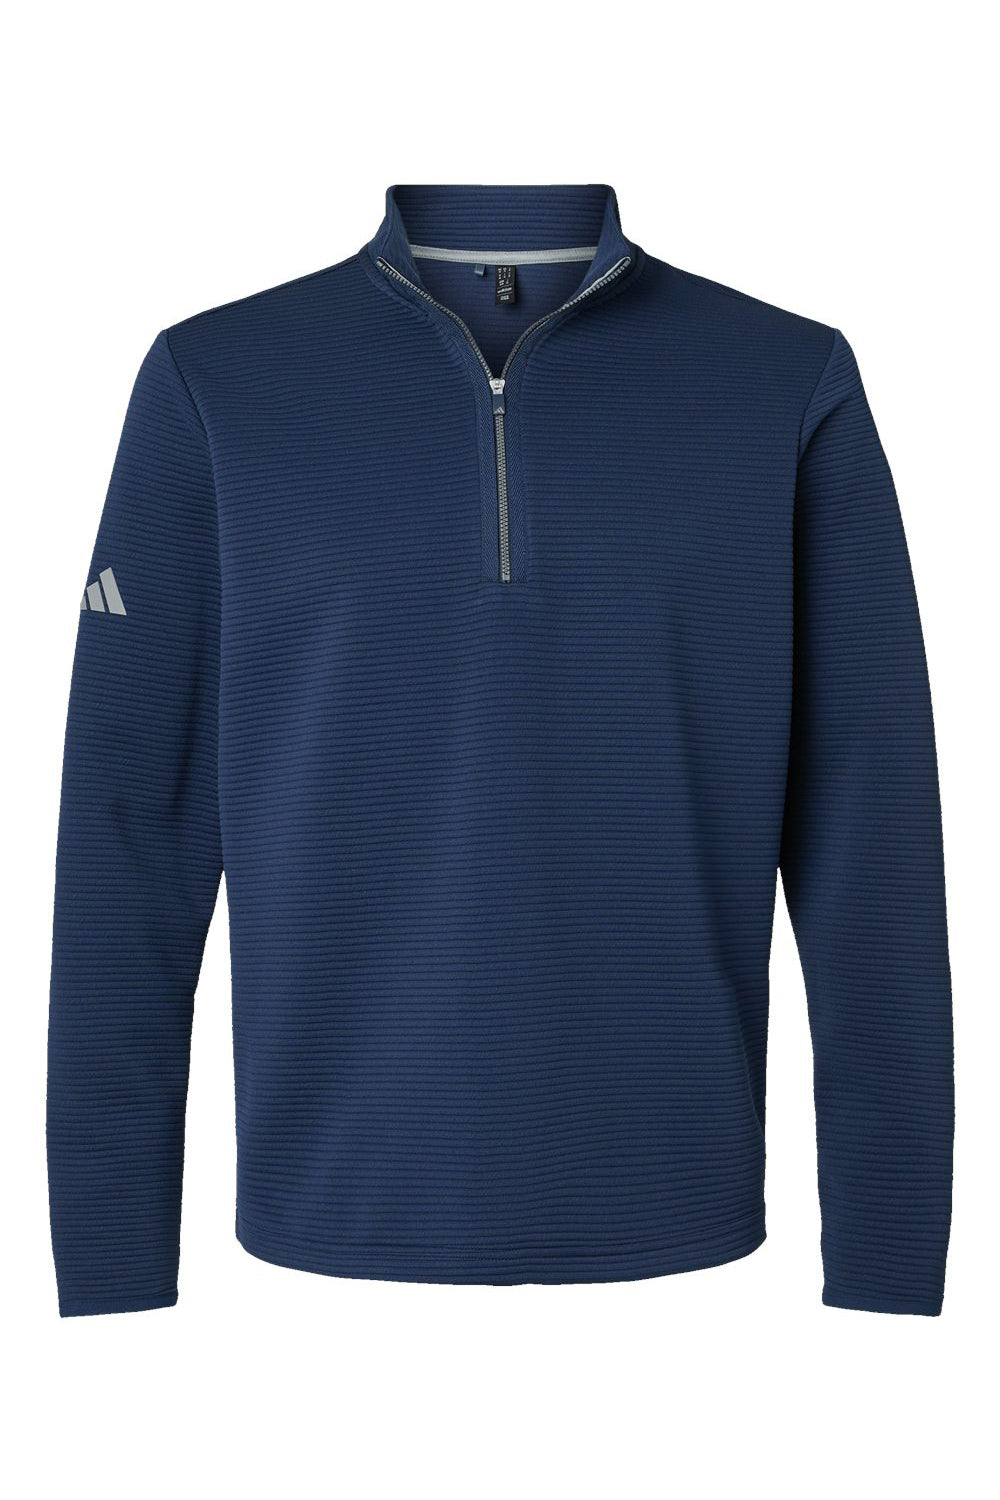 Adidas A588 Mens Spacer 1/4 Zip Pullover Collegiate Navy Blue Flat Front